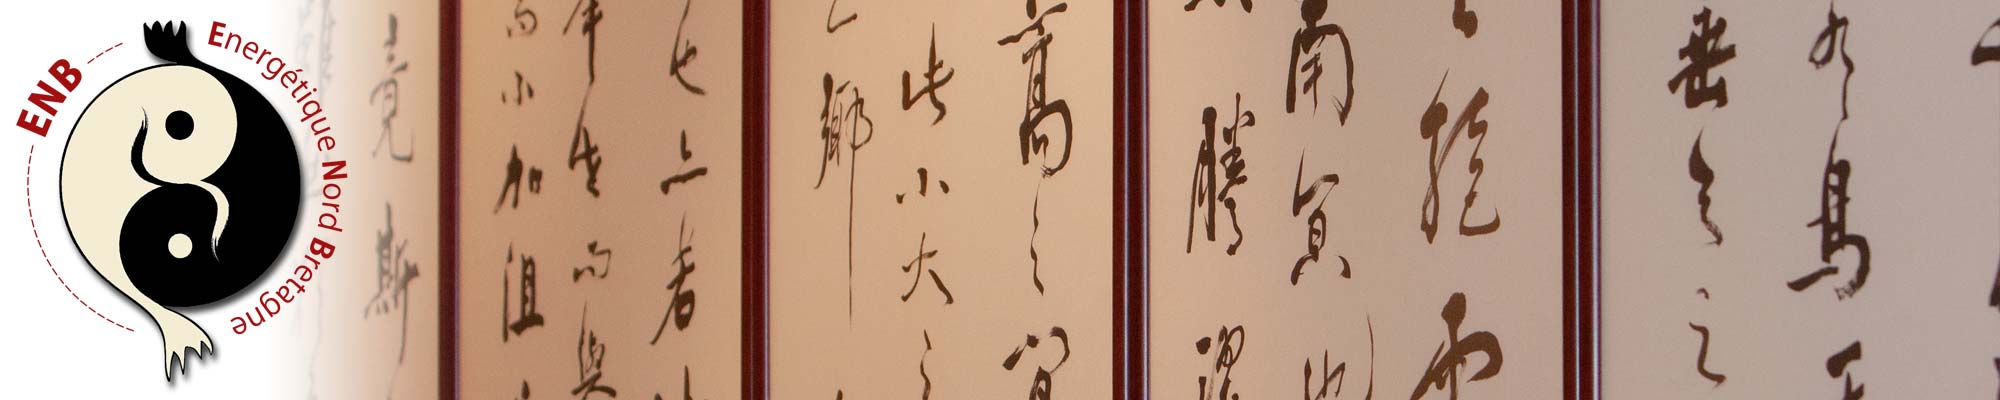 Lettres chinoise